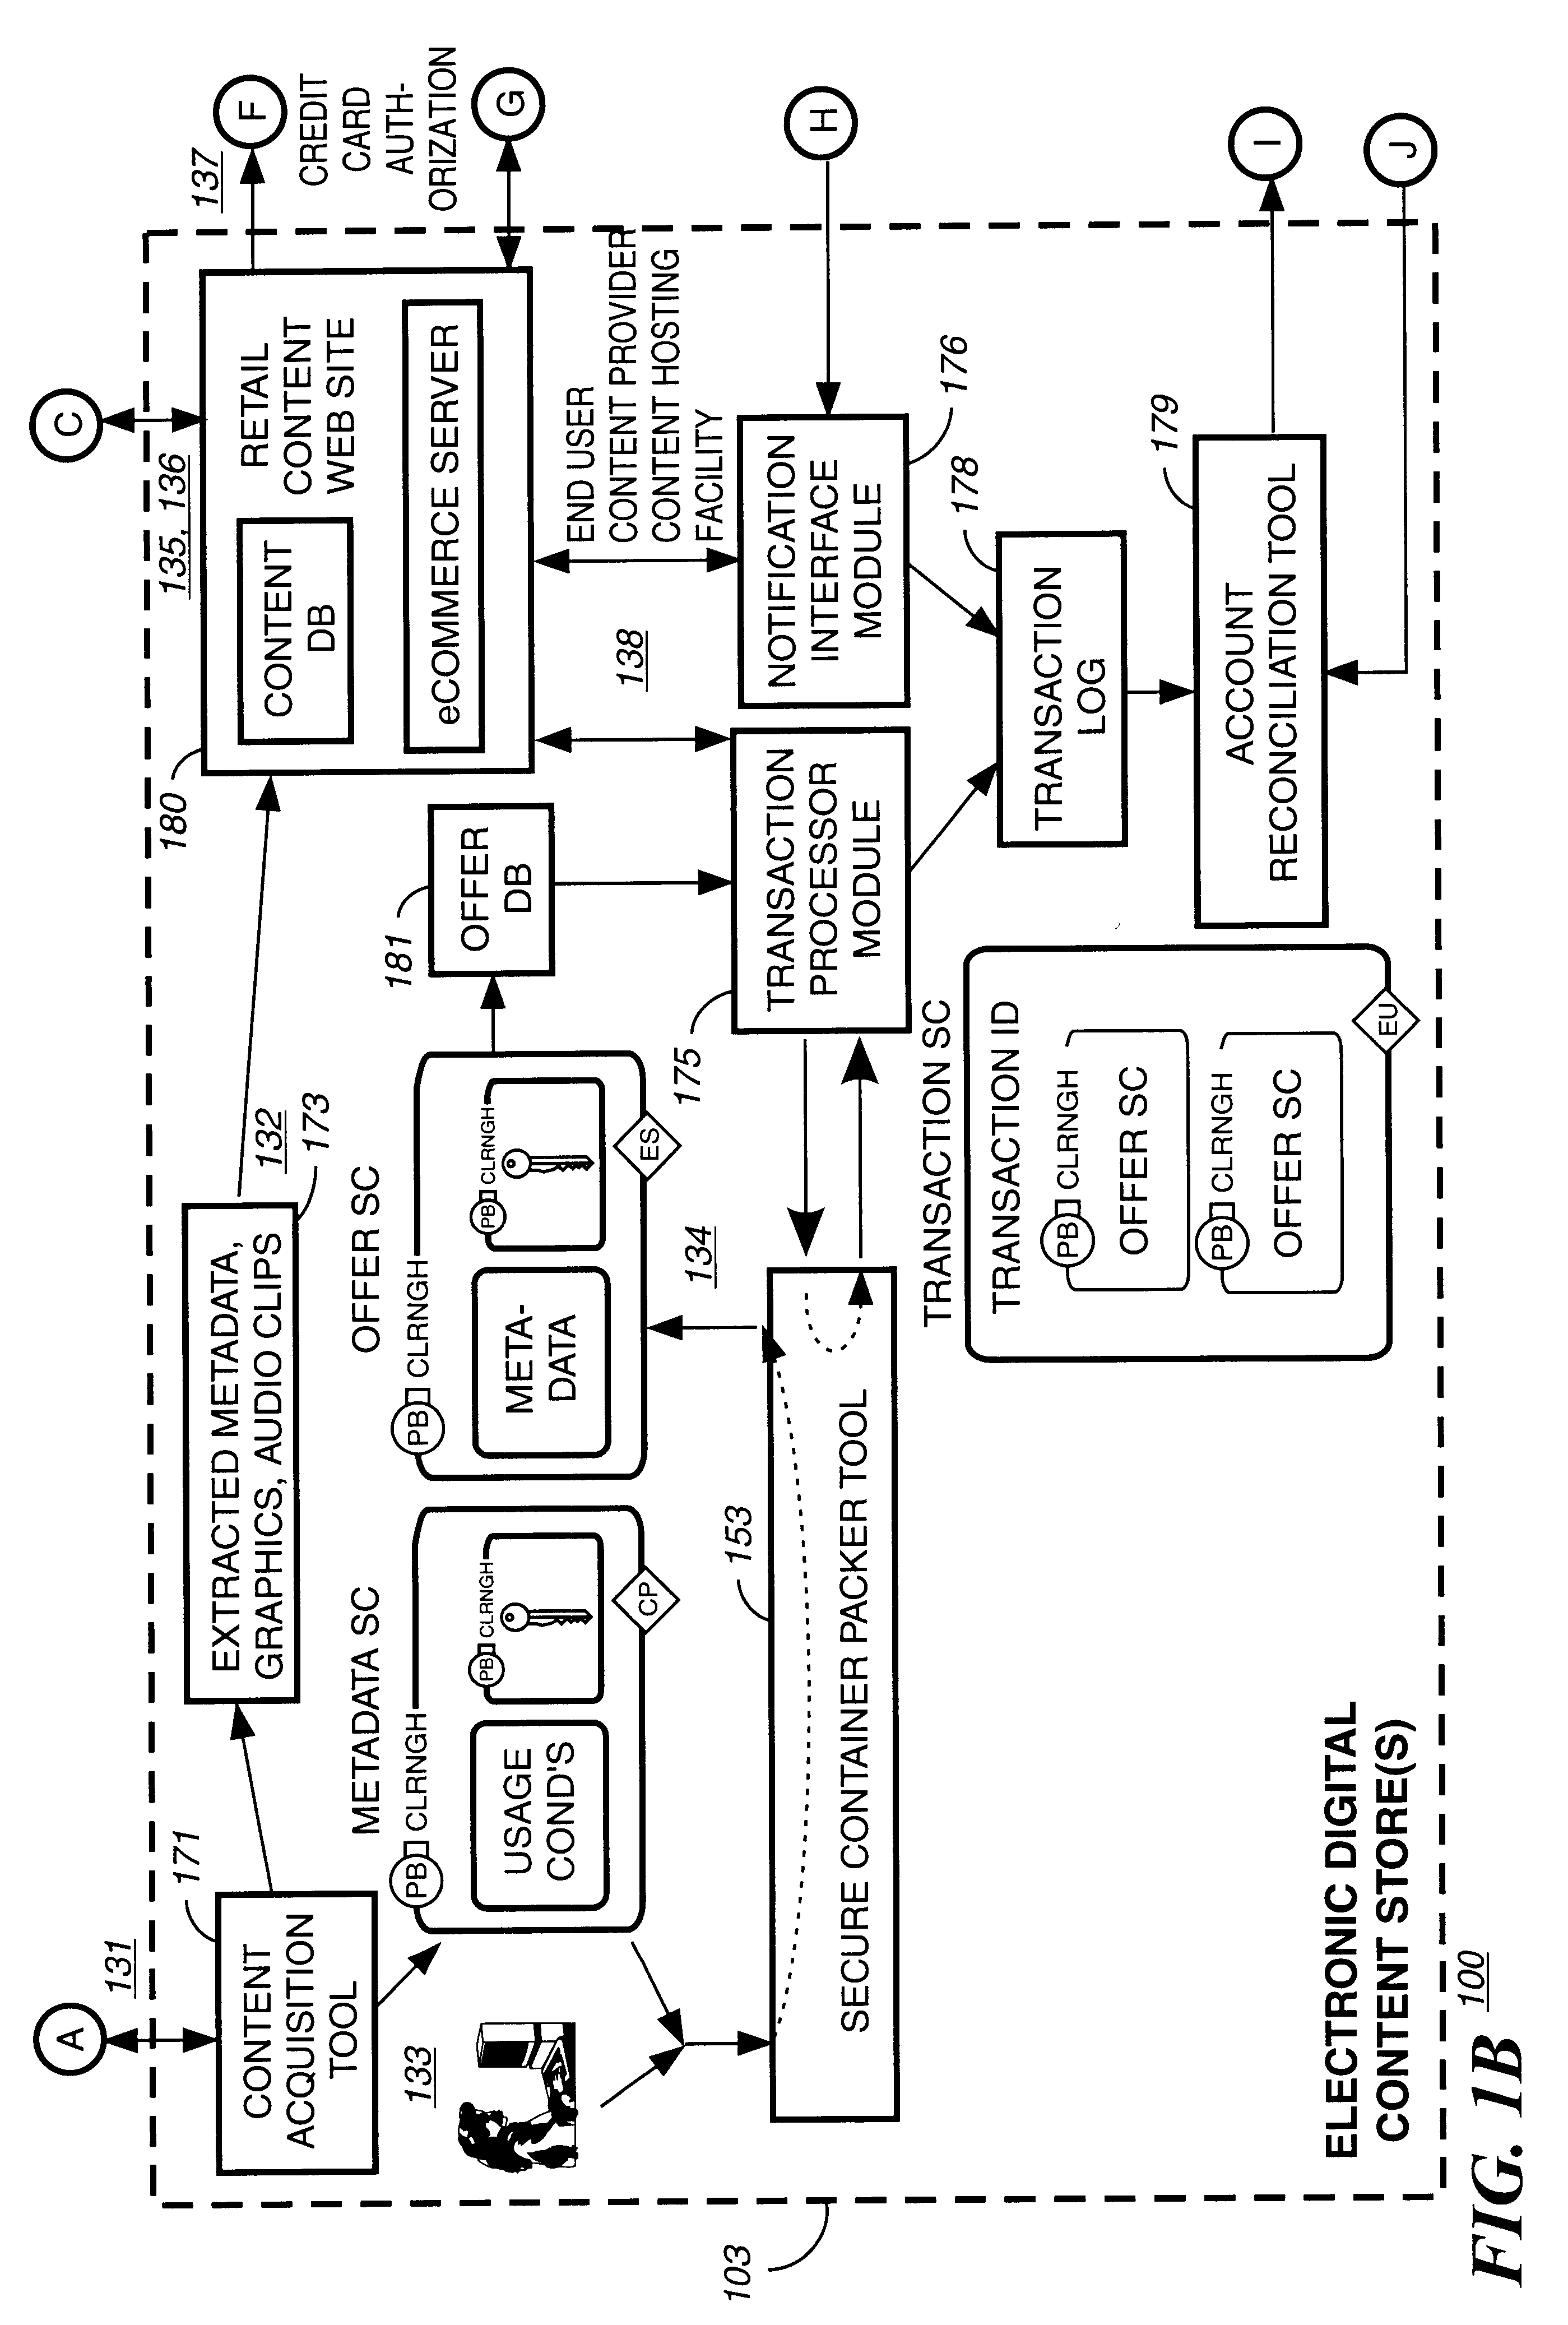 Automated method and apparatus to package digital content for electronic distribution using the identity of the source content